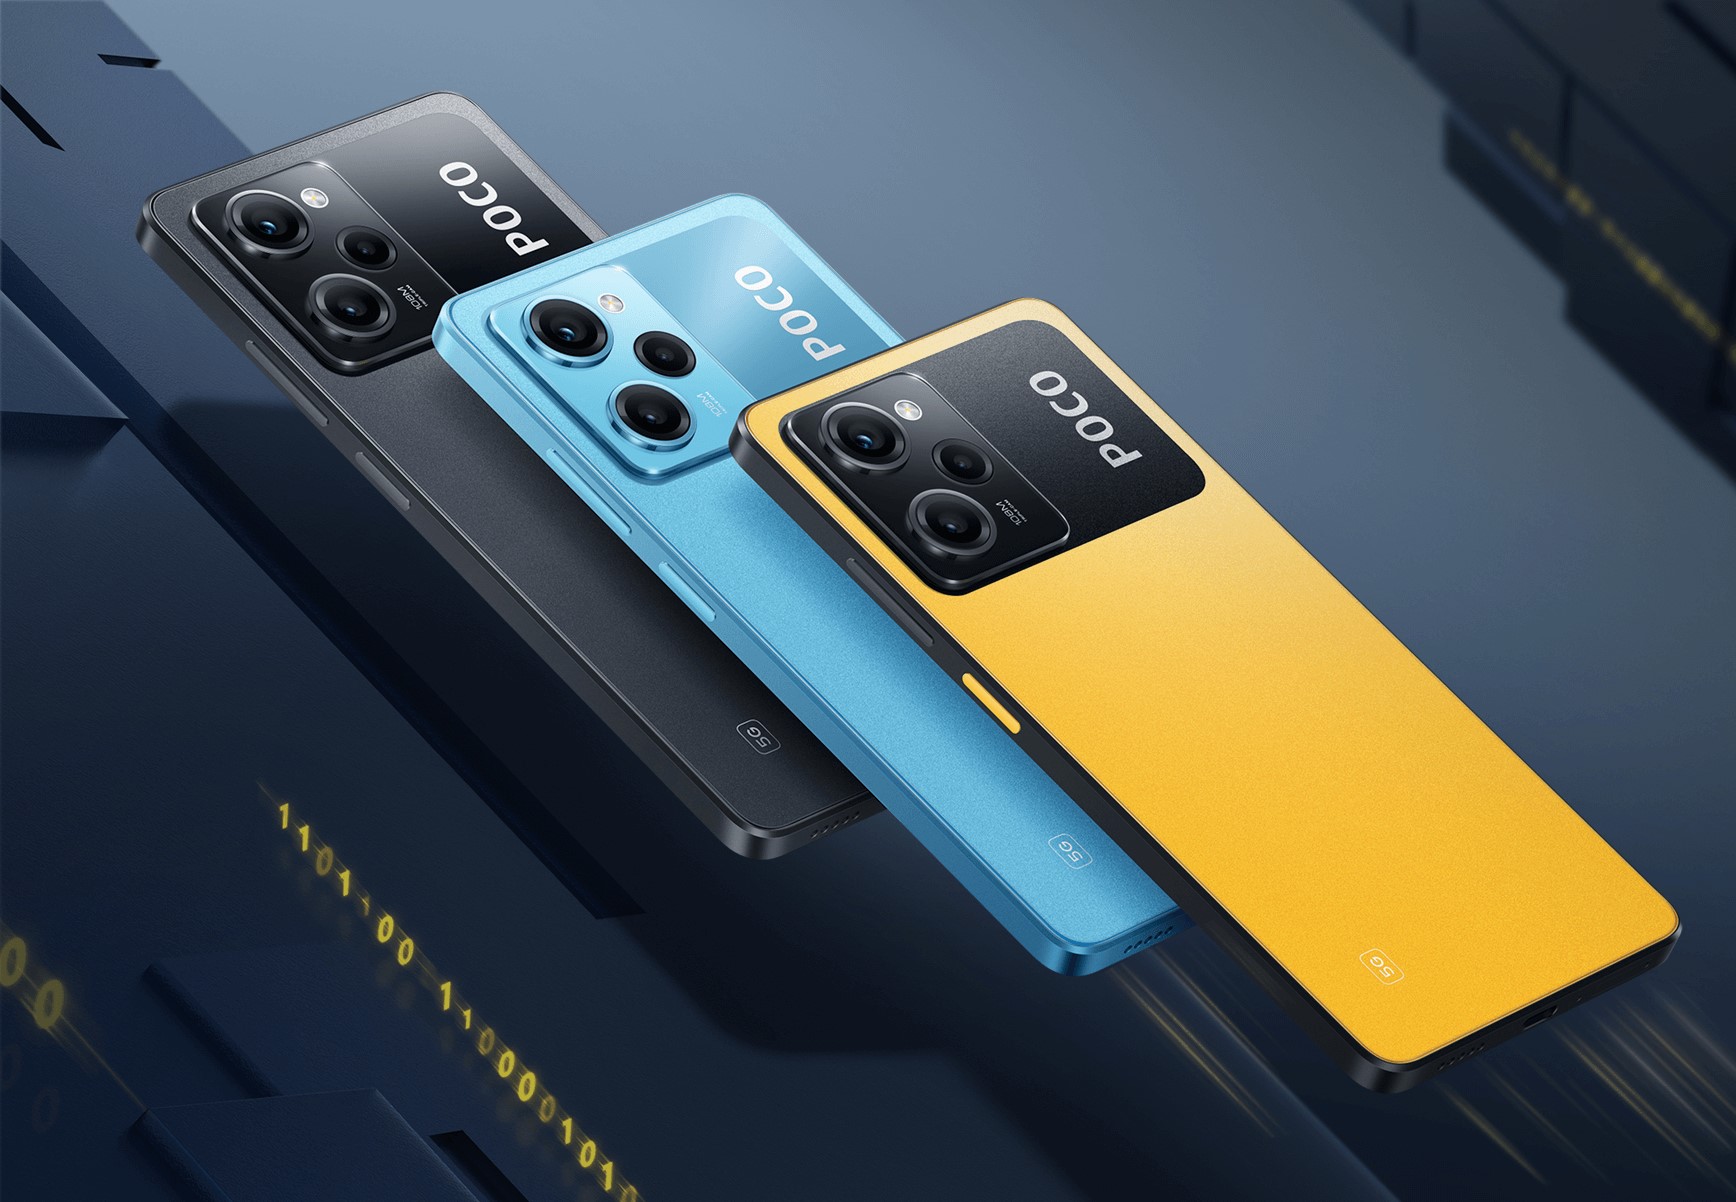 POCO X5 Pro 5G in Nepal: A tough competitor among mid-range smartphones in the market